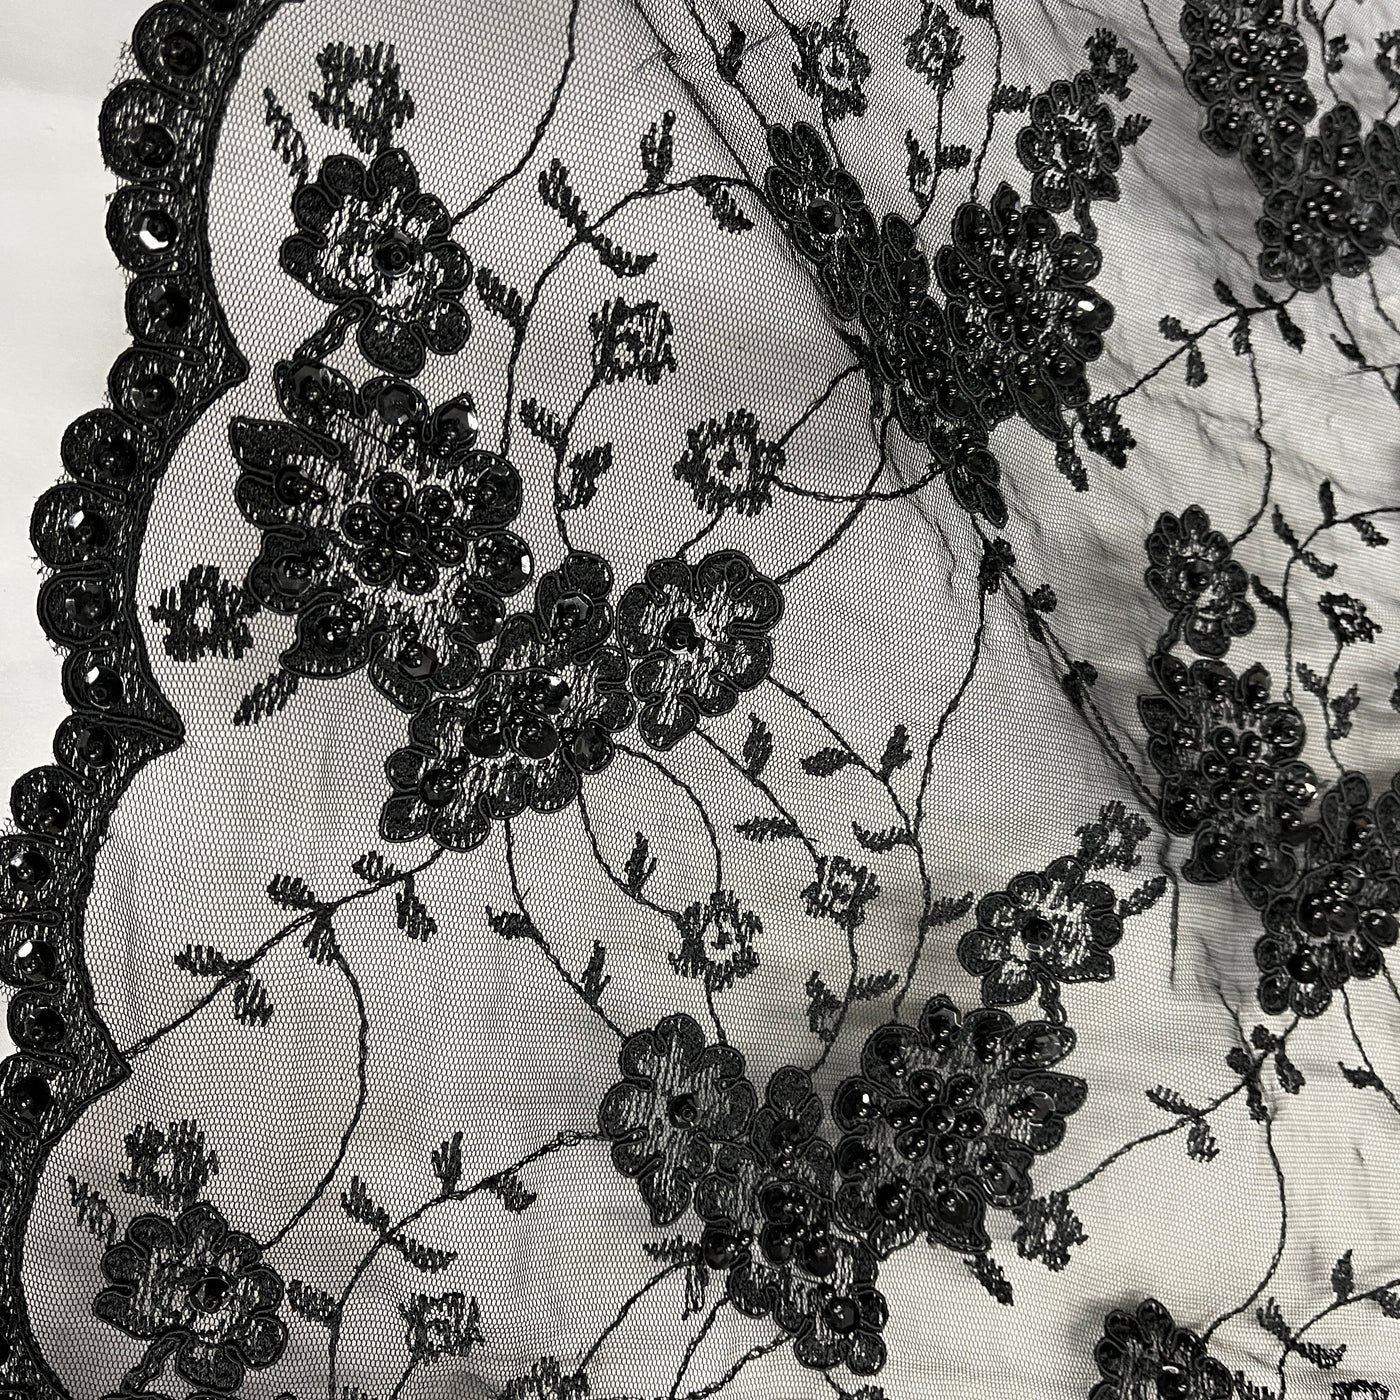 Beaded & Corded Lace Fabric Embroidered on 100% Polyester Net Mesh | Lace USA